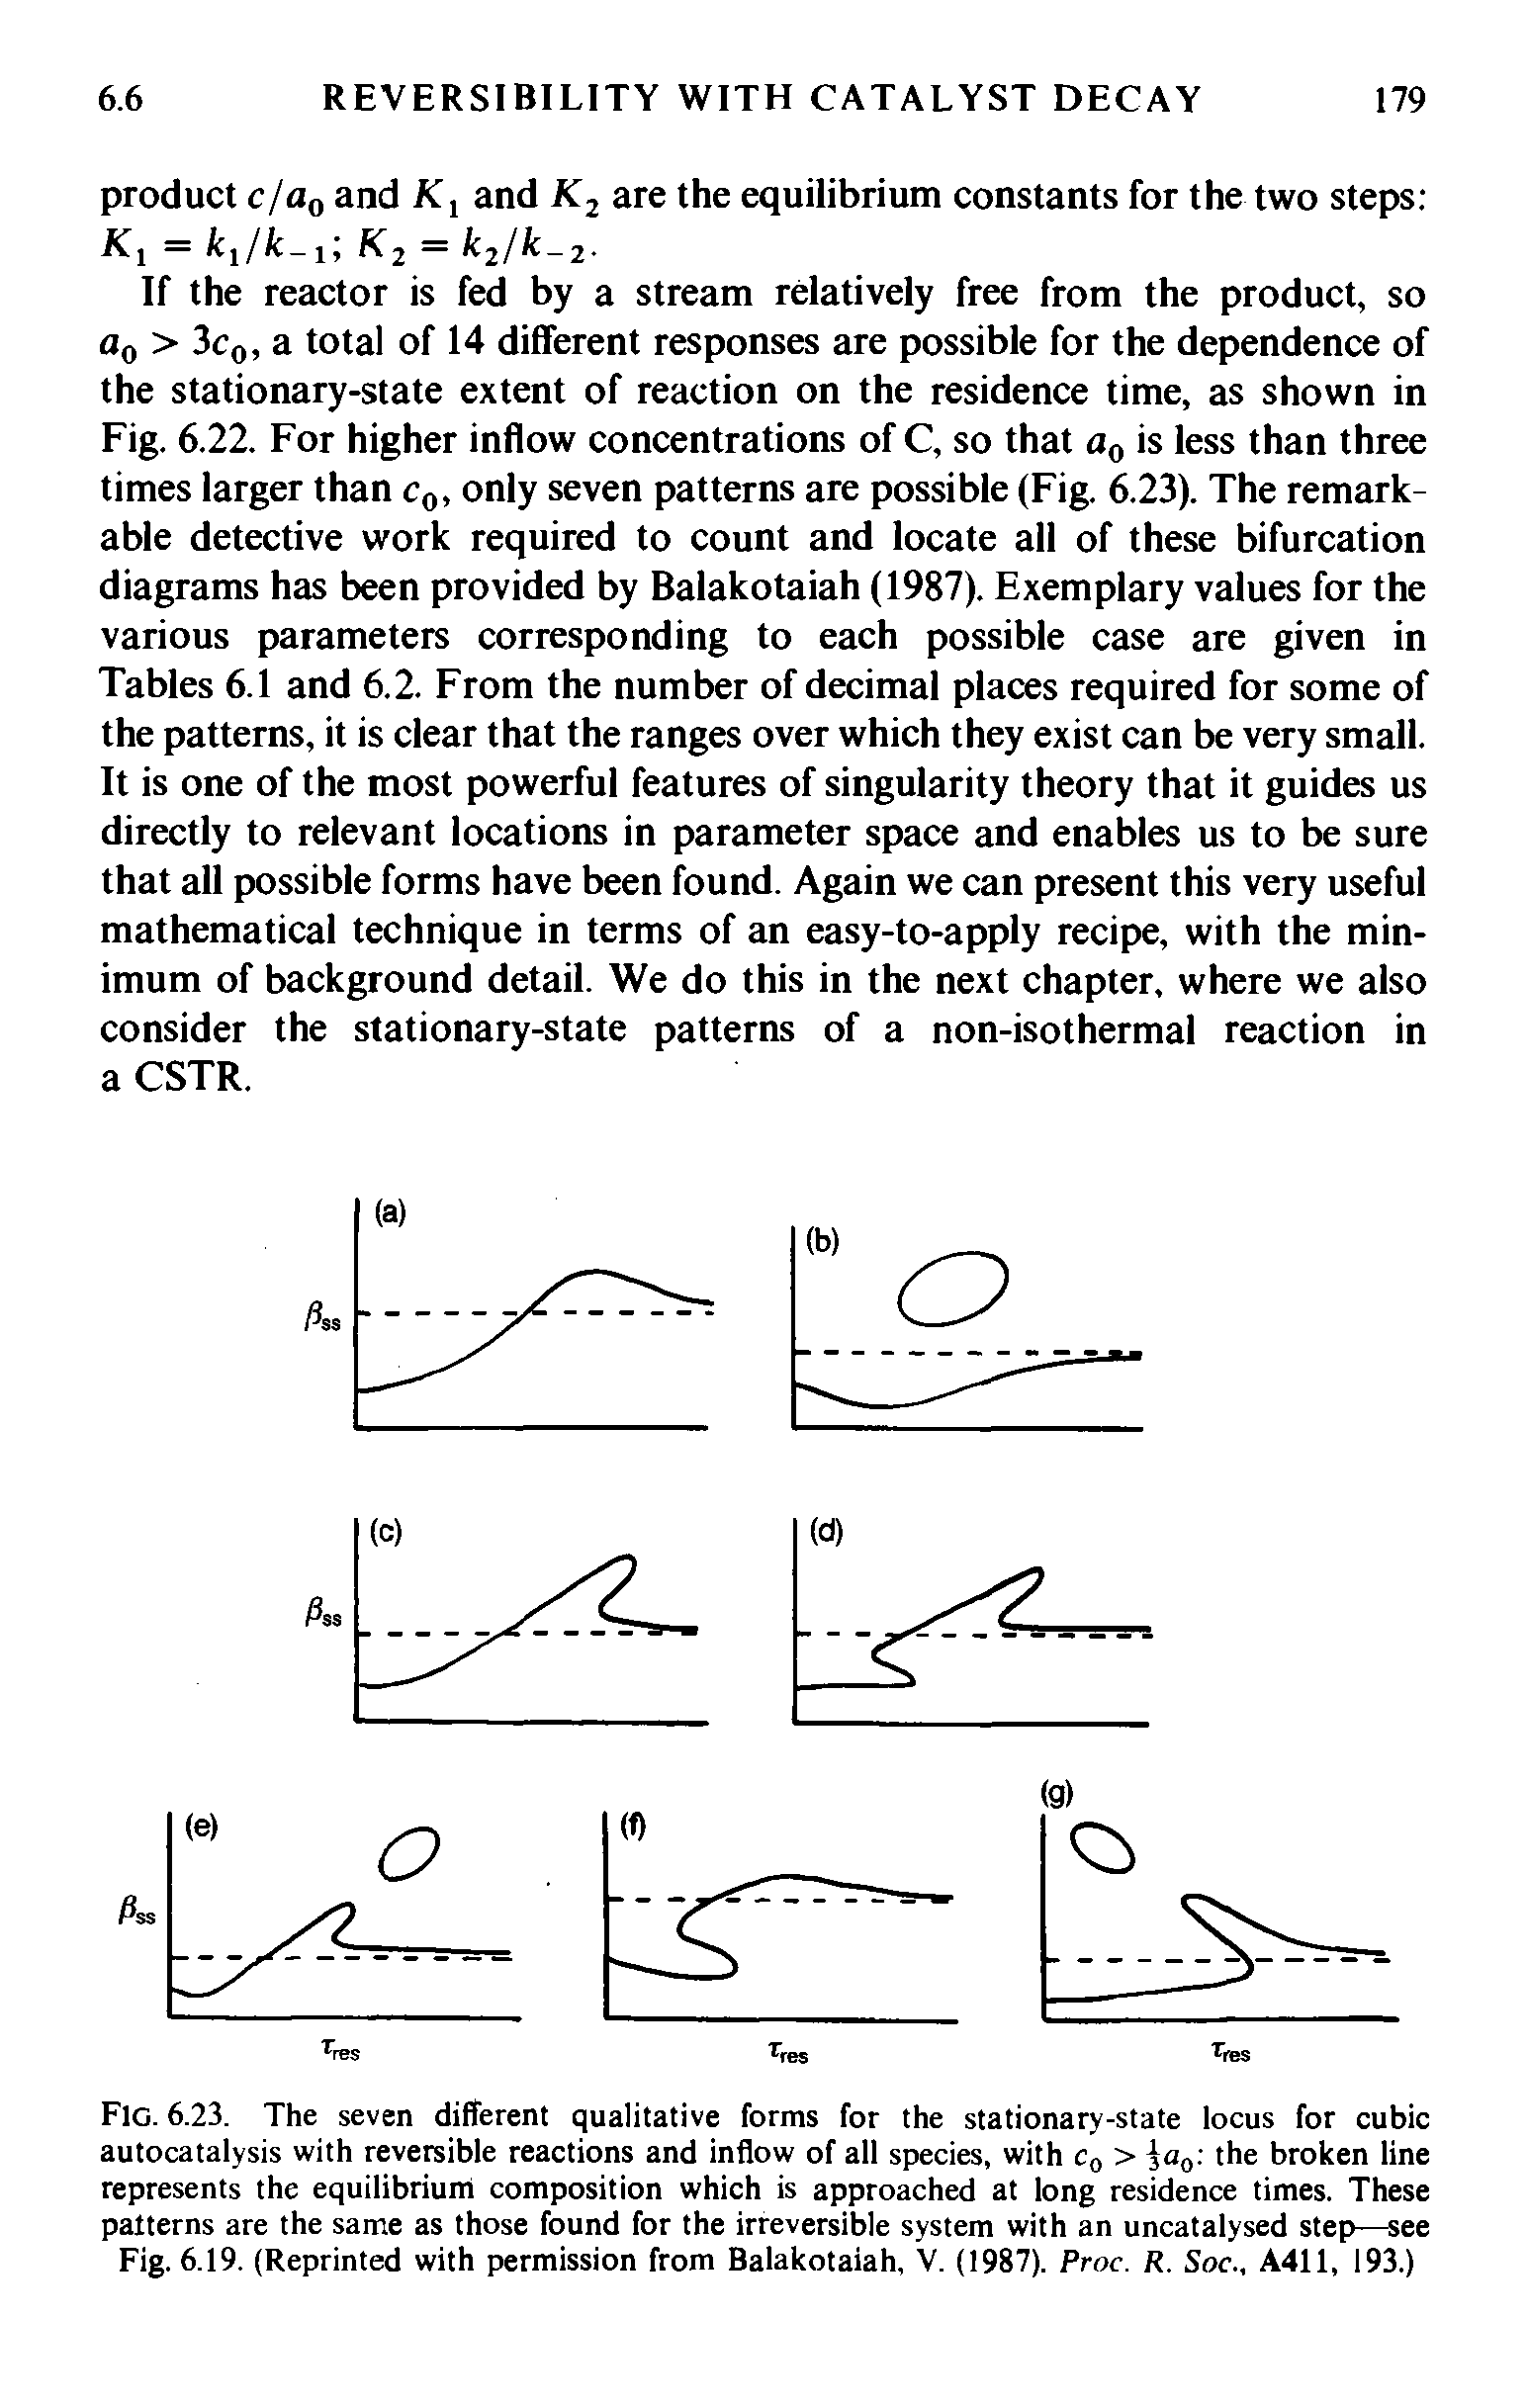 Fig. 6.23. The seven different qualitative forms for the stationary-state locus for cubic autocatalysis with reversible reactions and inflow of all species, with c0 > )a0 the broken line represents the equilibrium composition which is approached at long residence times. These patterns are the same as those found for the irreversible system with an uncatalysed step—see Fig. 6.19. (Reprinted with permission from Balakotaiah, V. (1987). Proc. R. Soc., A411, 193.)...